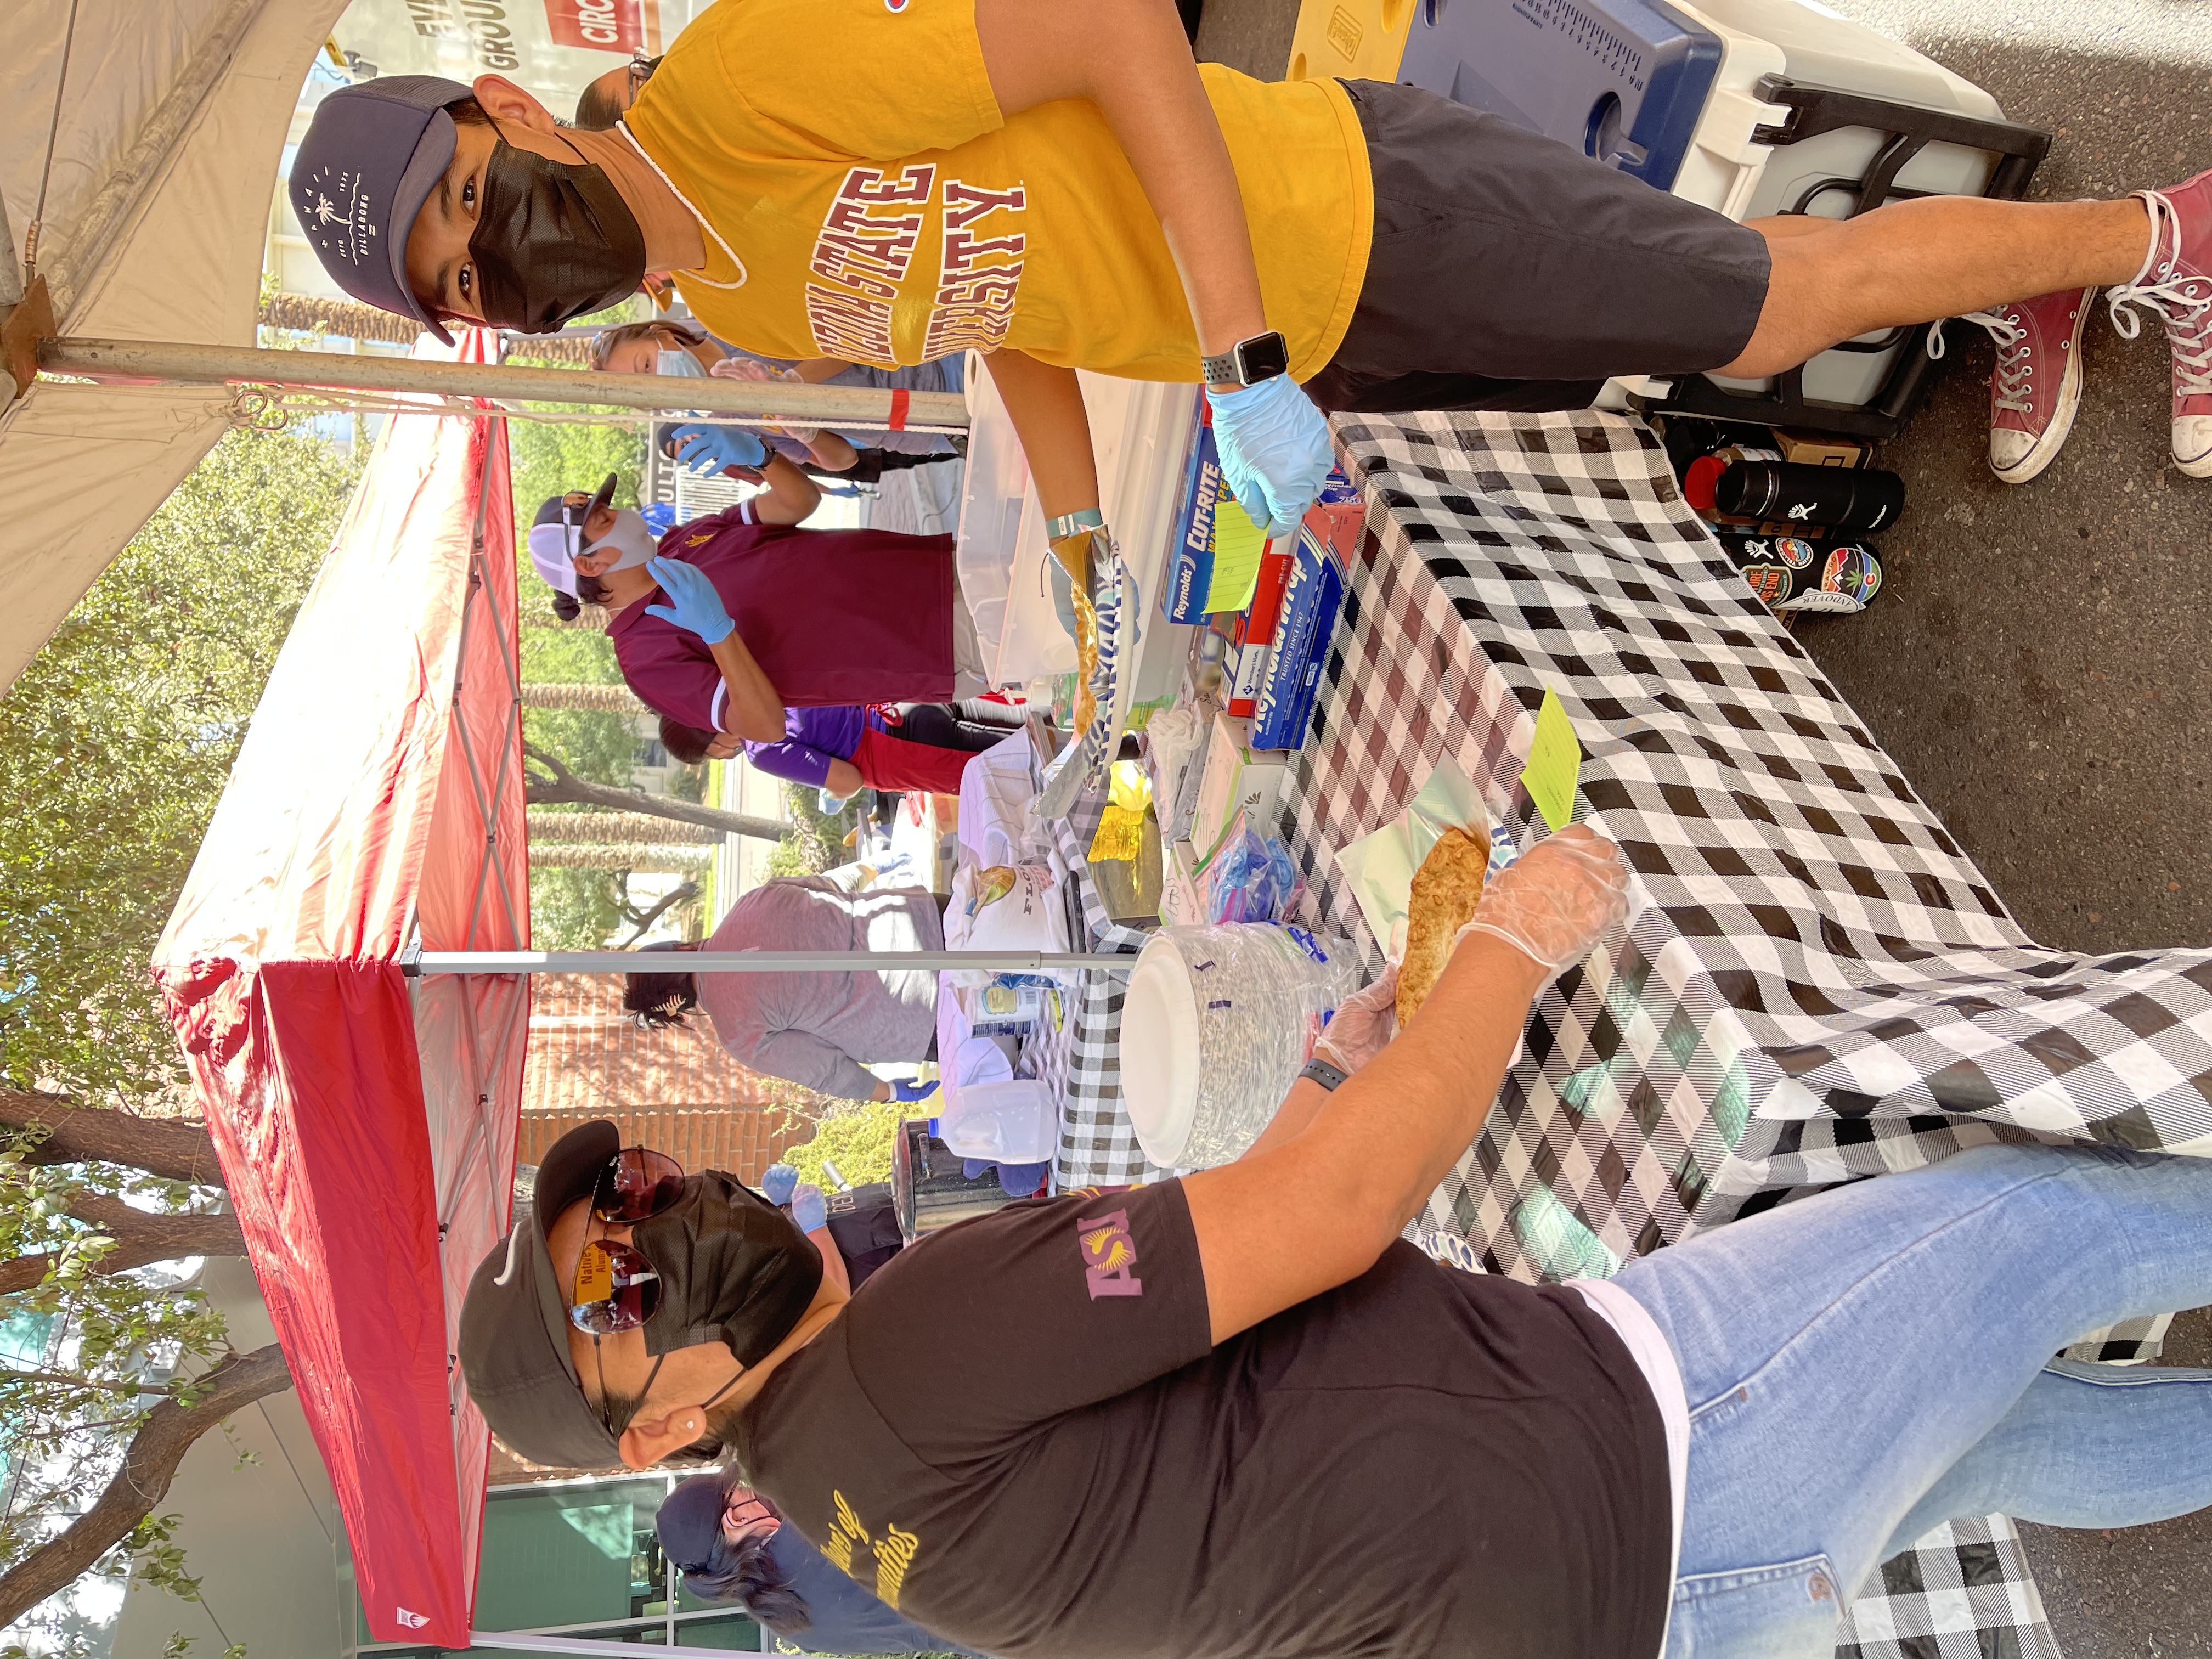 ASU students volunteering at the Frybread booth.